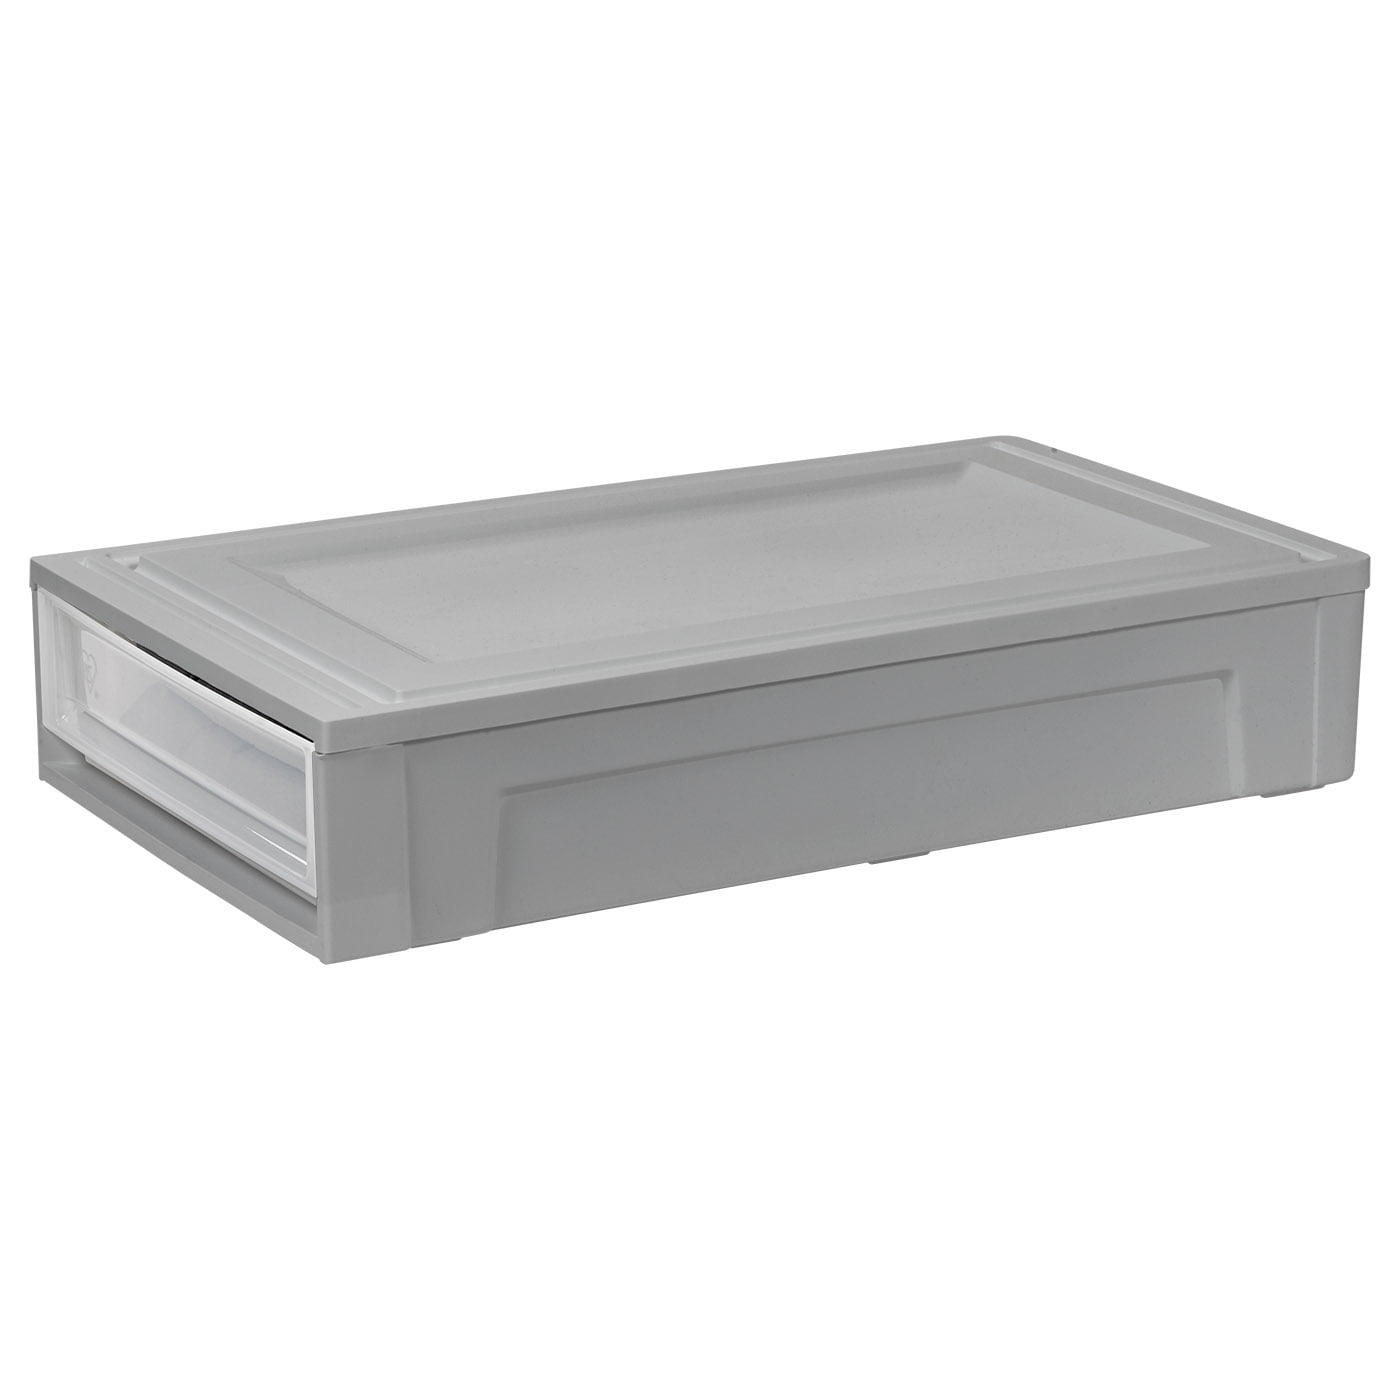 IRIS USA 27 Qt. (7 Gal.) Under Bed Plastic Storage Box with Pullout Drawer, Gray